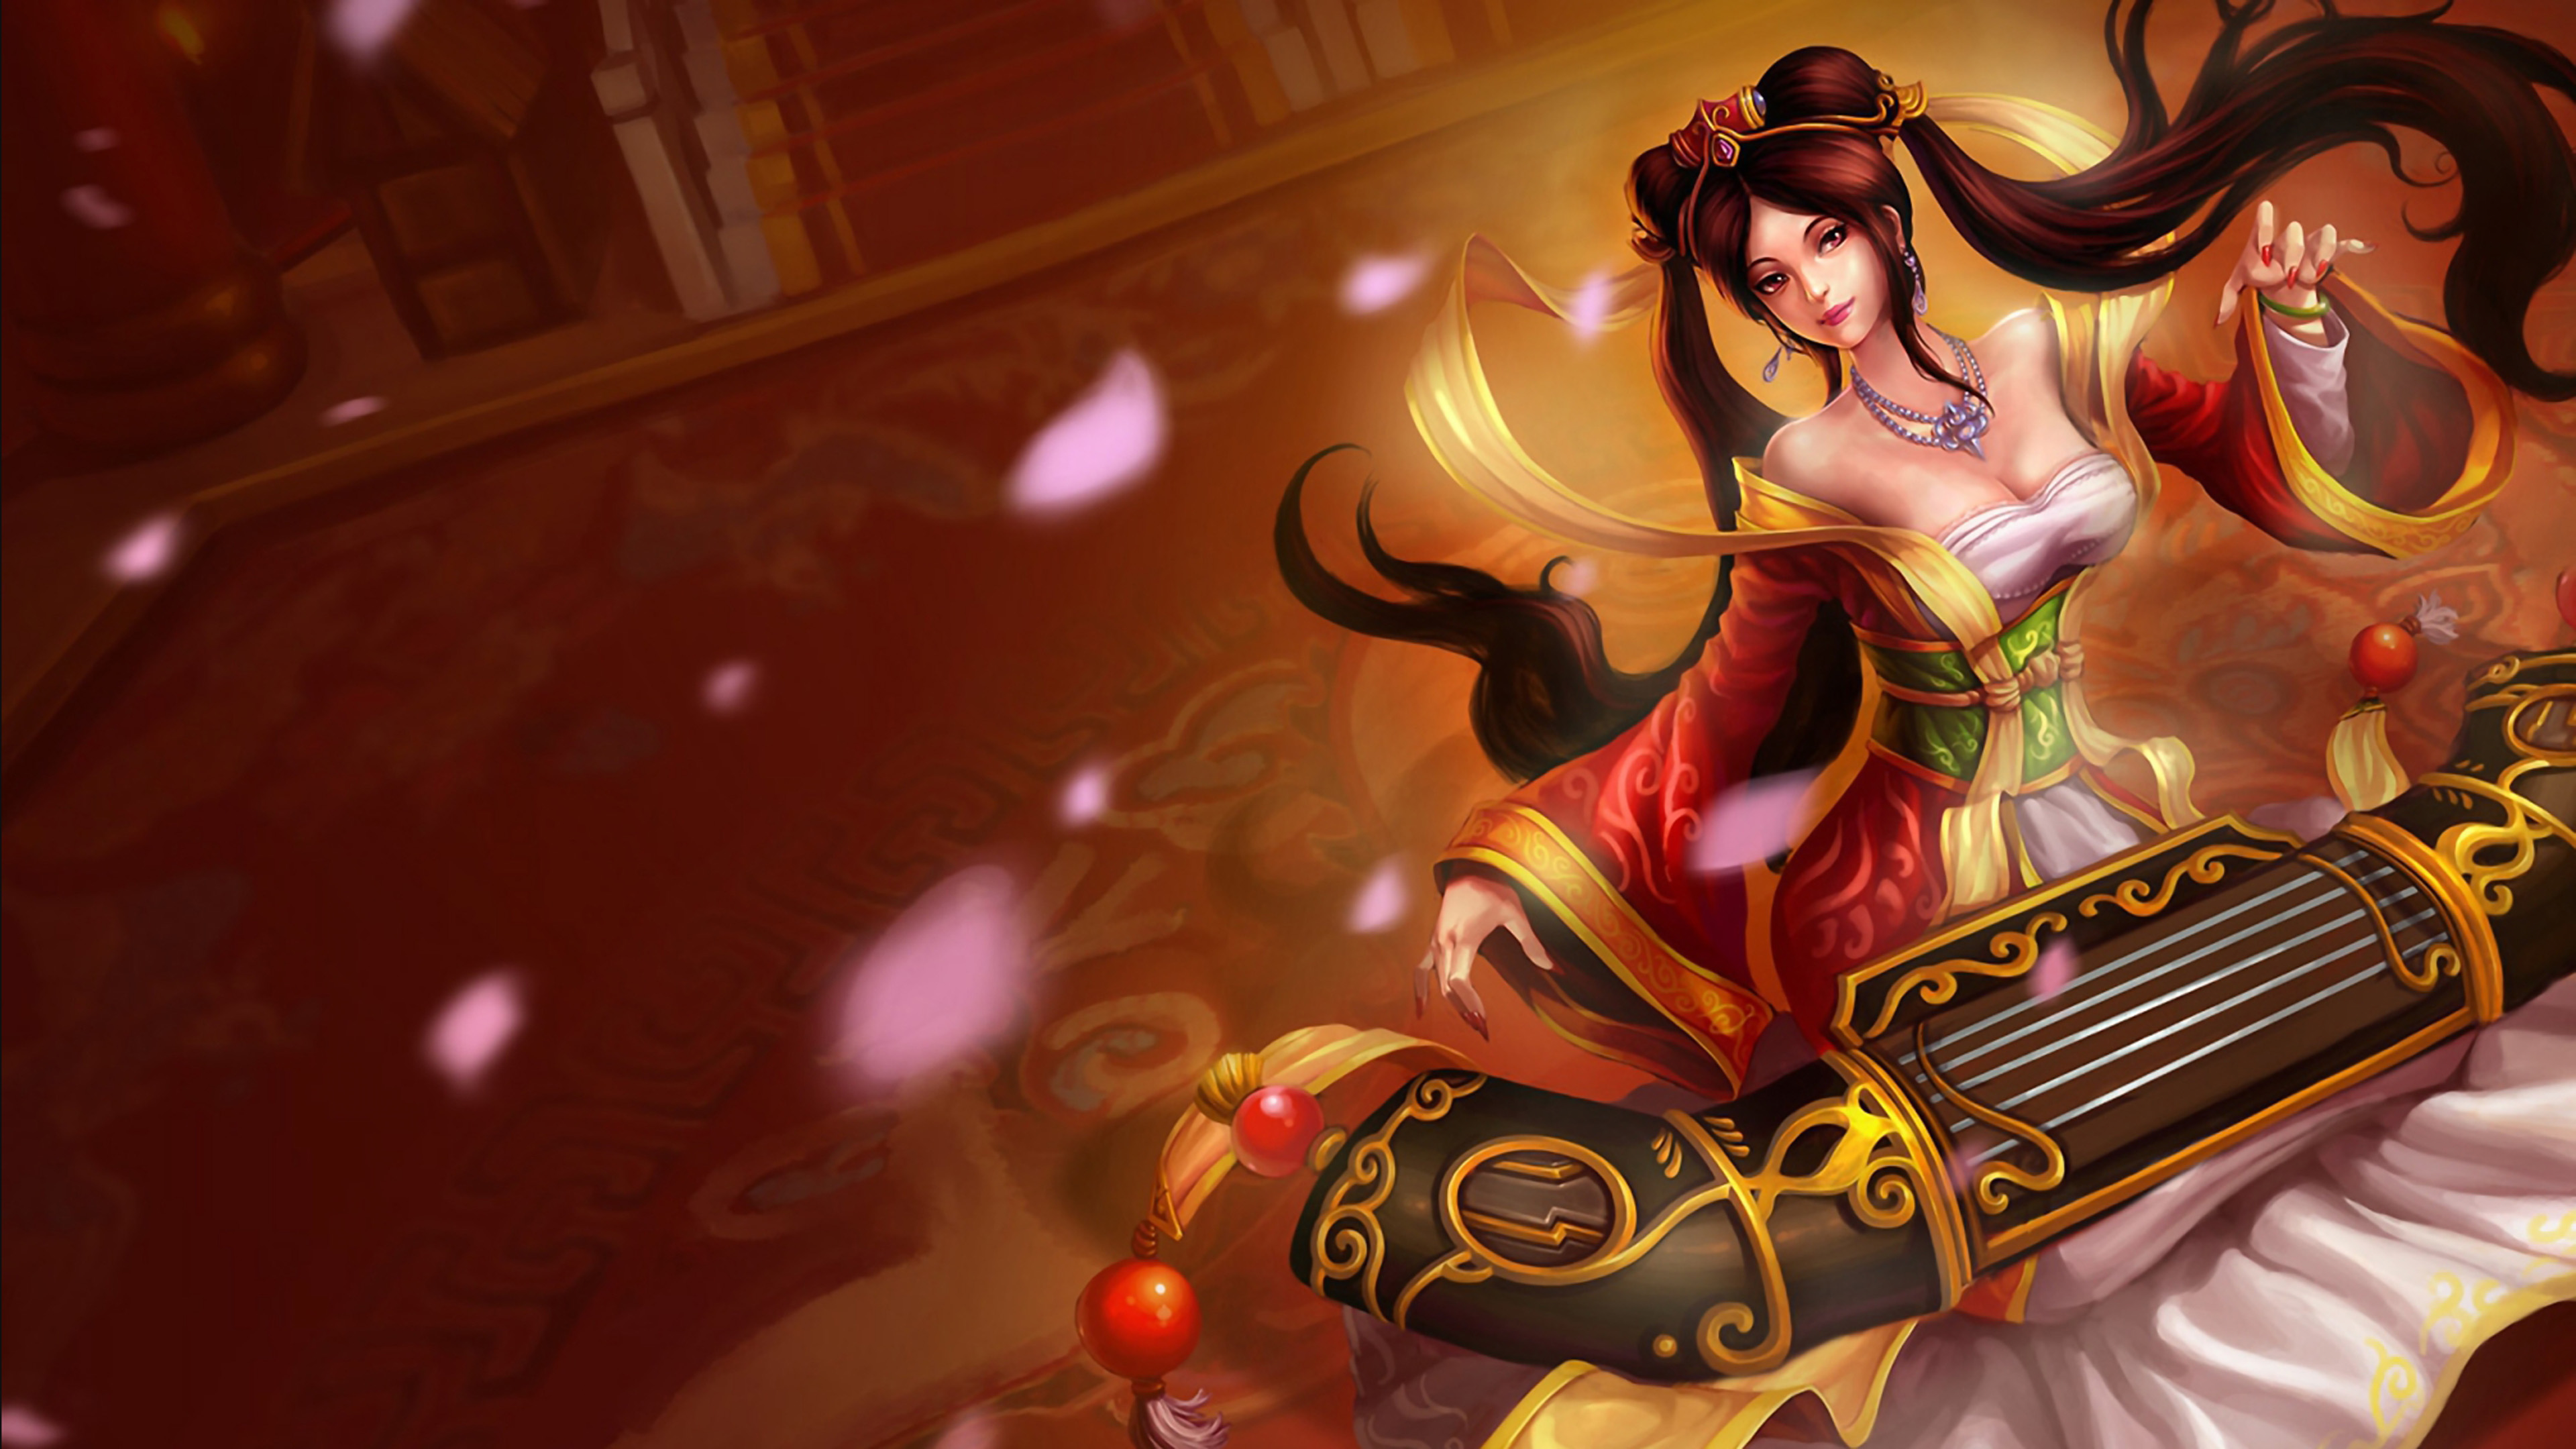 Fantasy Girl League Of Legends Sona League Of Legends Video Game Woman 3840x2160